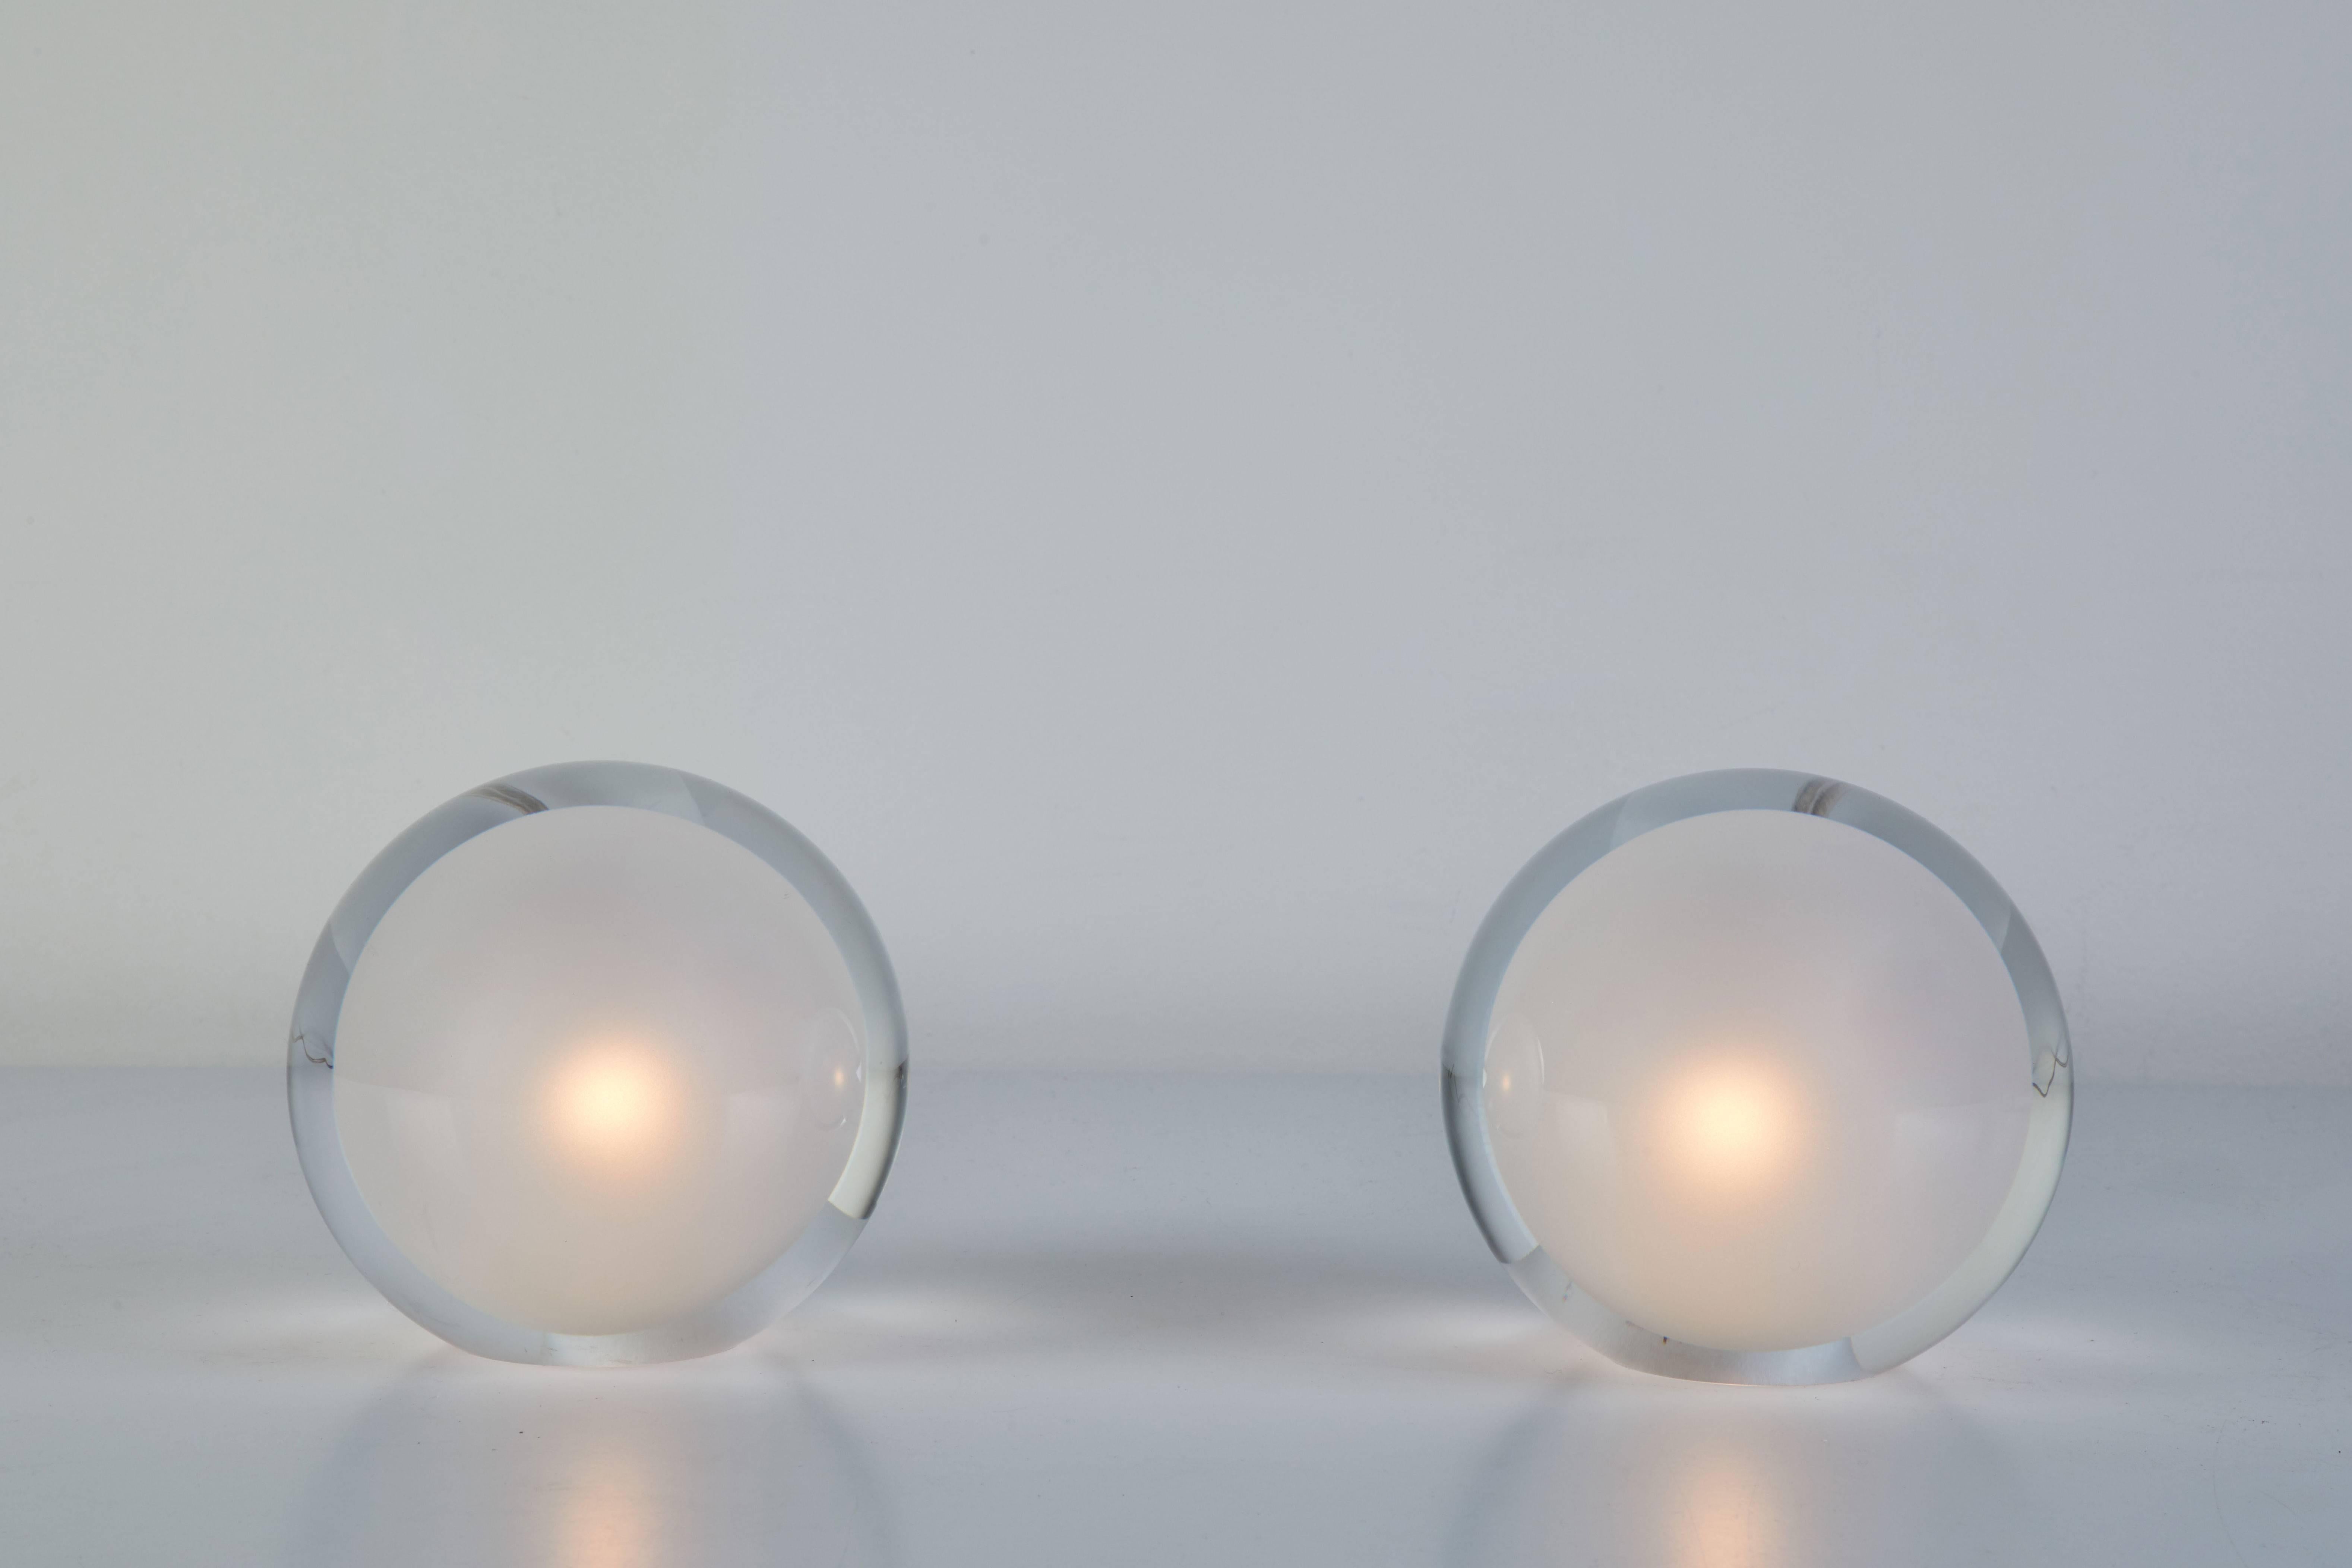 Teardrop table lamp by Tokujin Yoshioka designed for Yamagiwa in Japan. An orb of light floats within the transparent hard glass globe. Scaled to the size of a human heart, it is not a lighting fixture, but a design of light, itself. Part of the